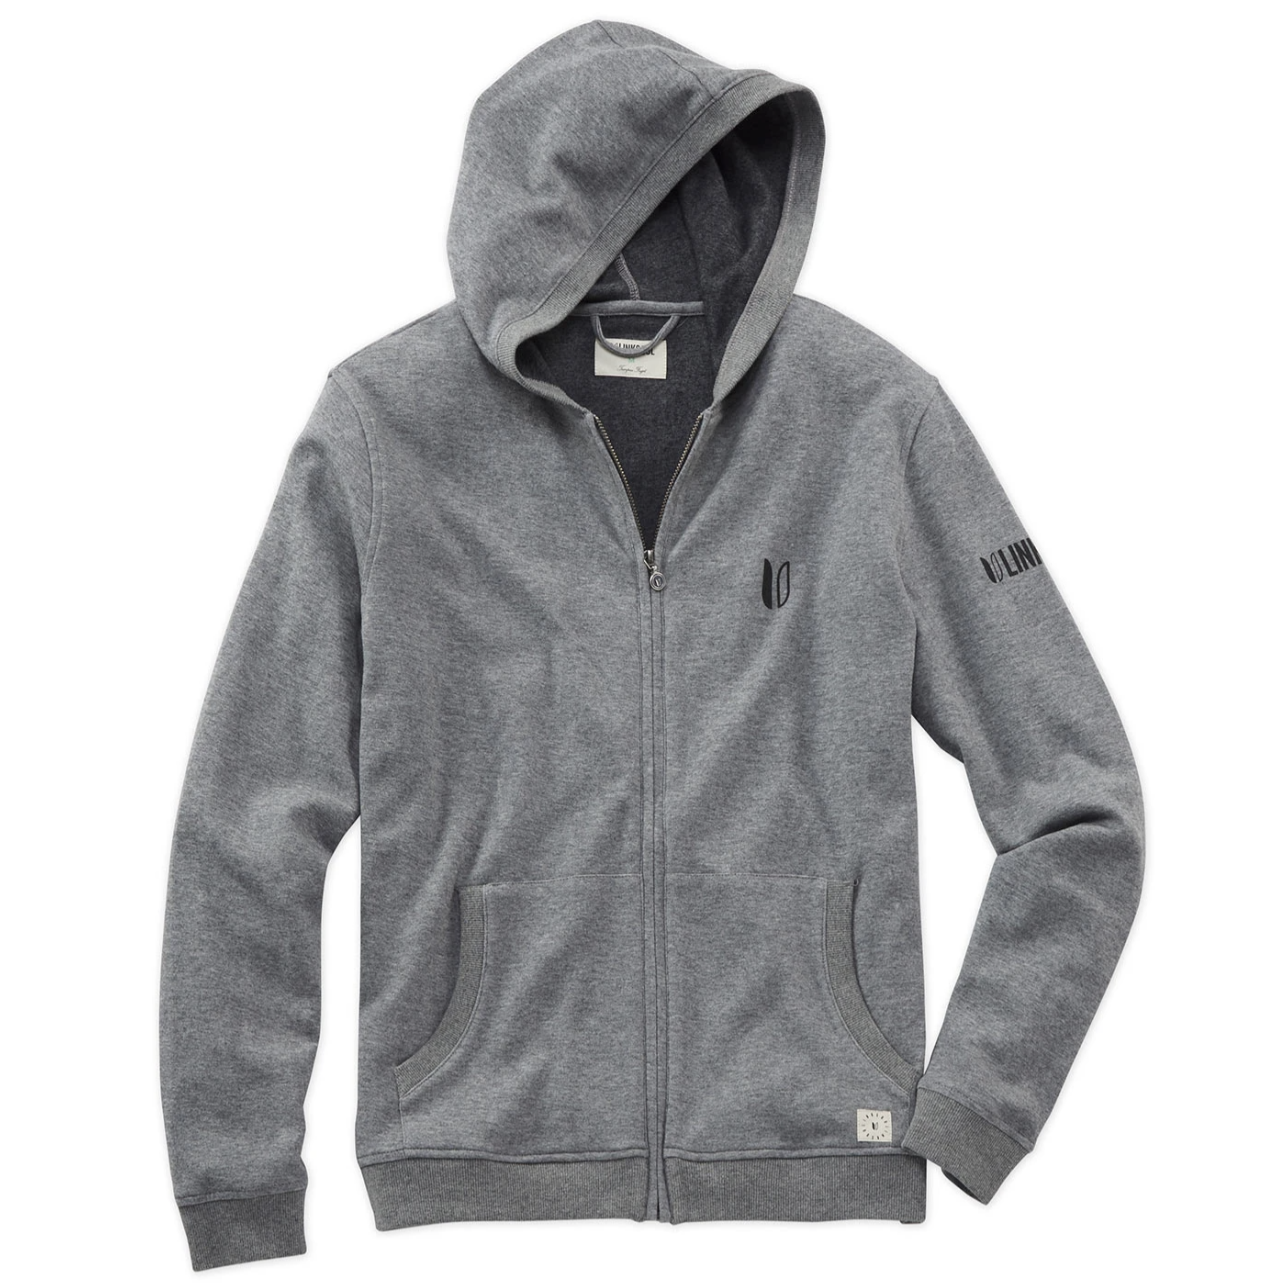 Bring Hatton’s hoodie look home with these top golf hoodies – GolfWRX